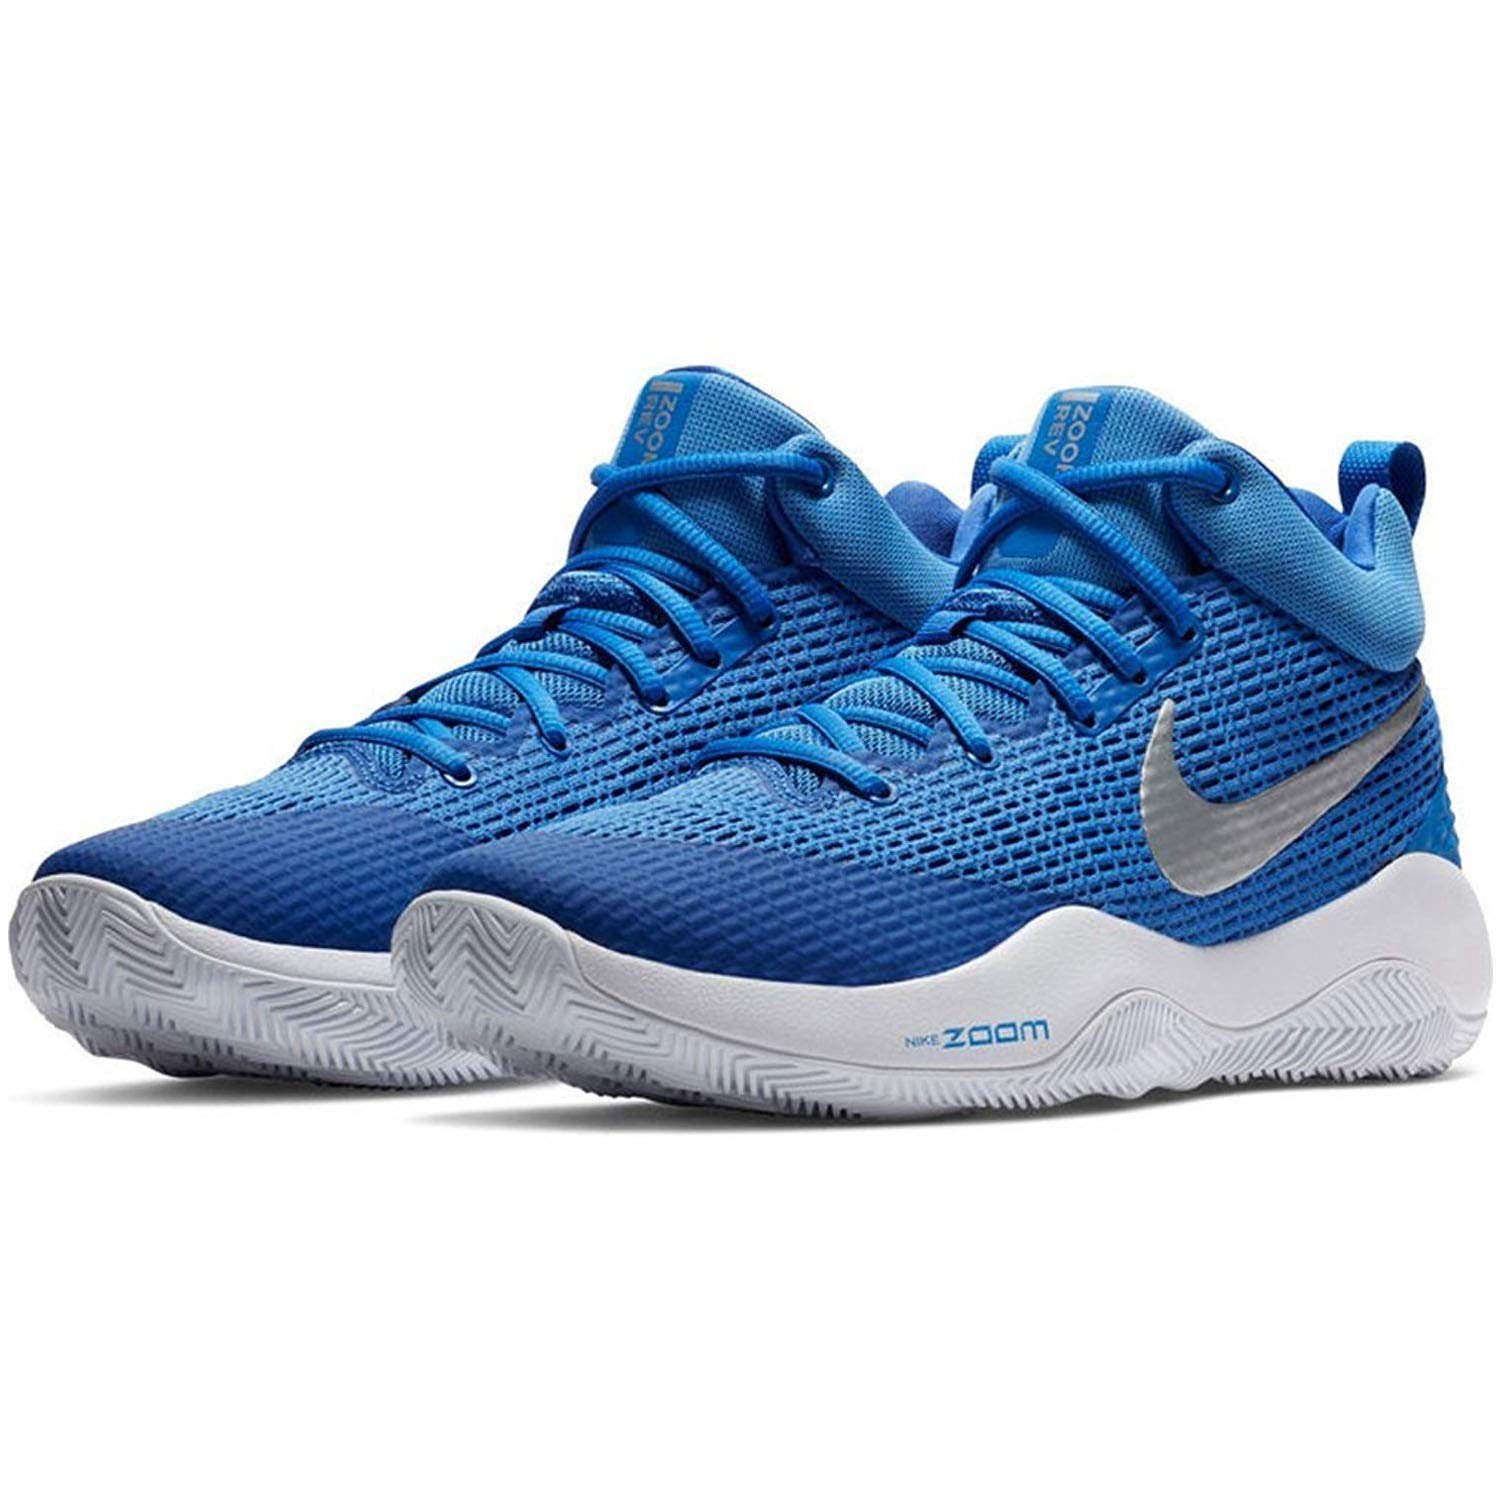 nike basketball shoes release 2019,Save up to 17%,www.masserv.com